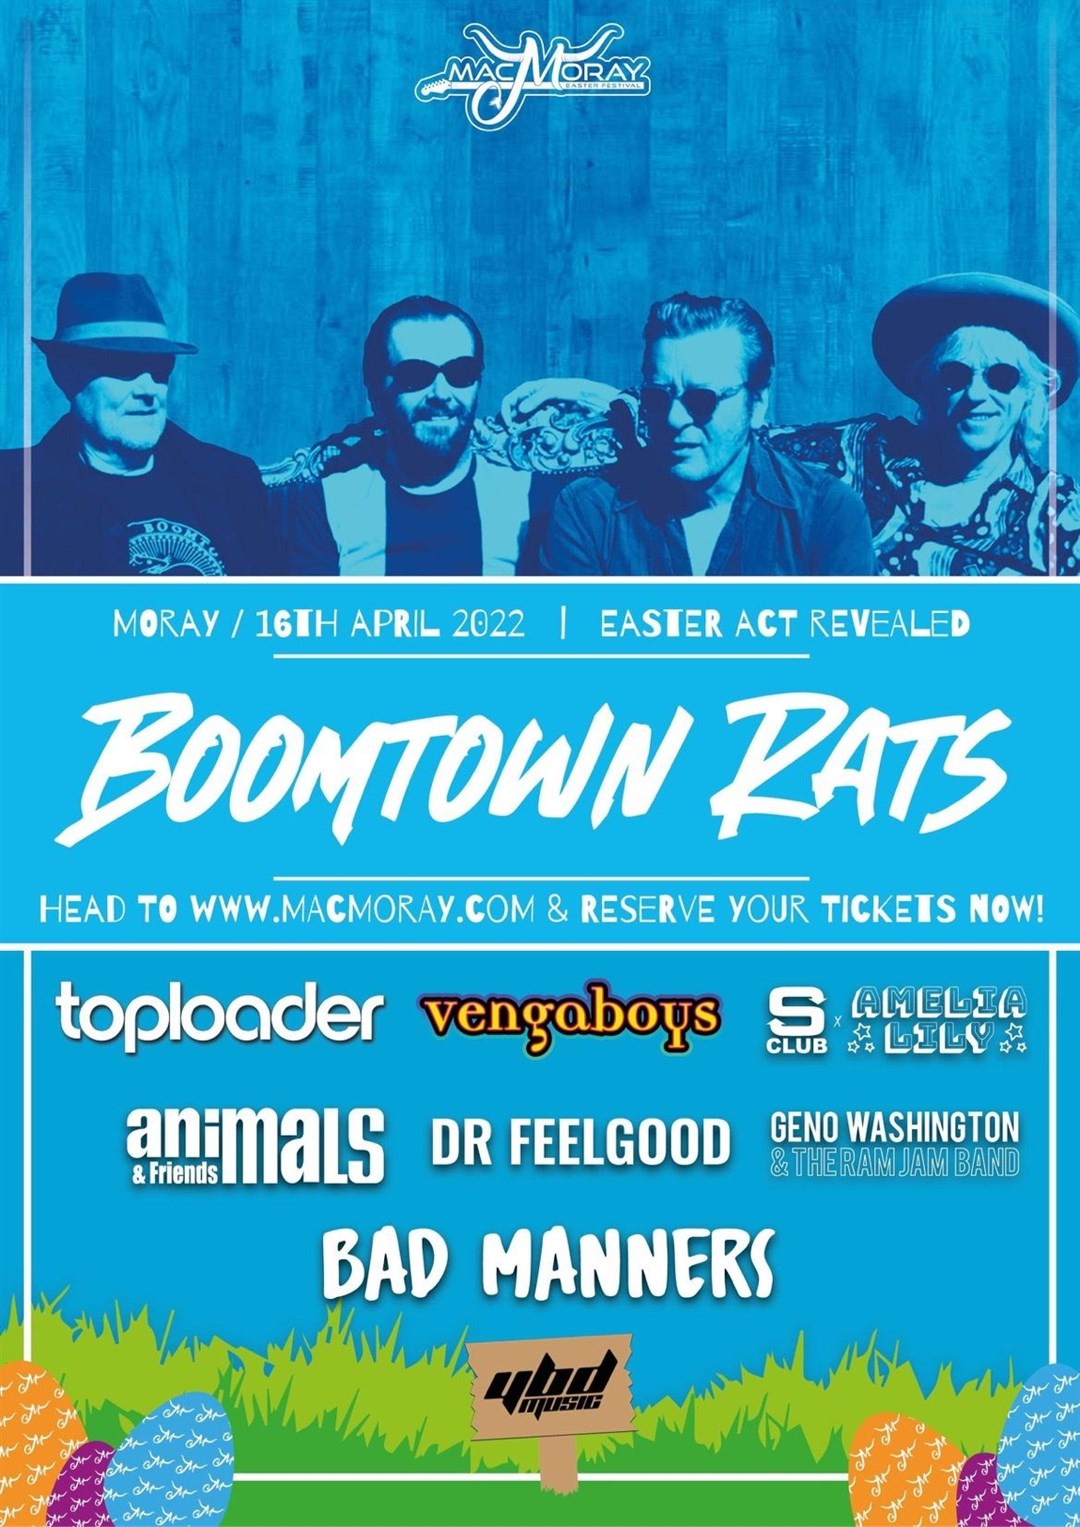 Bob Geldof and the Boomtown Rats are coming to Cooper Park on April 16.